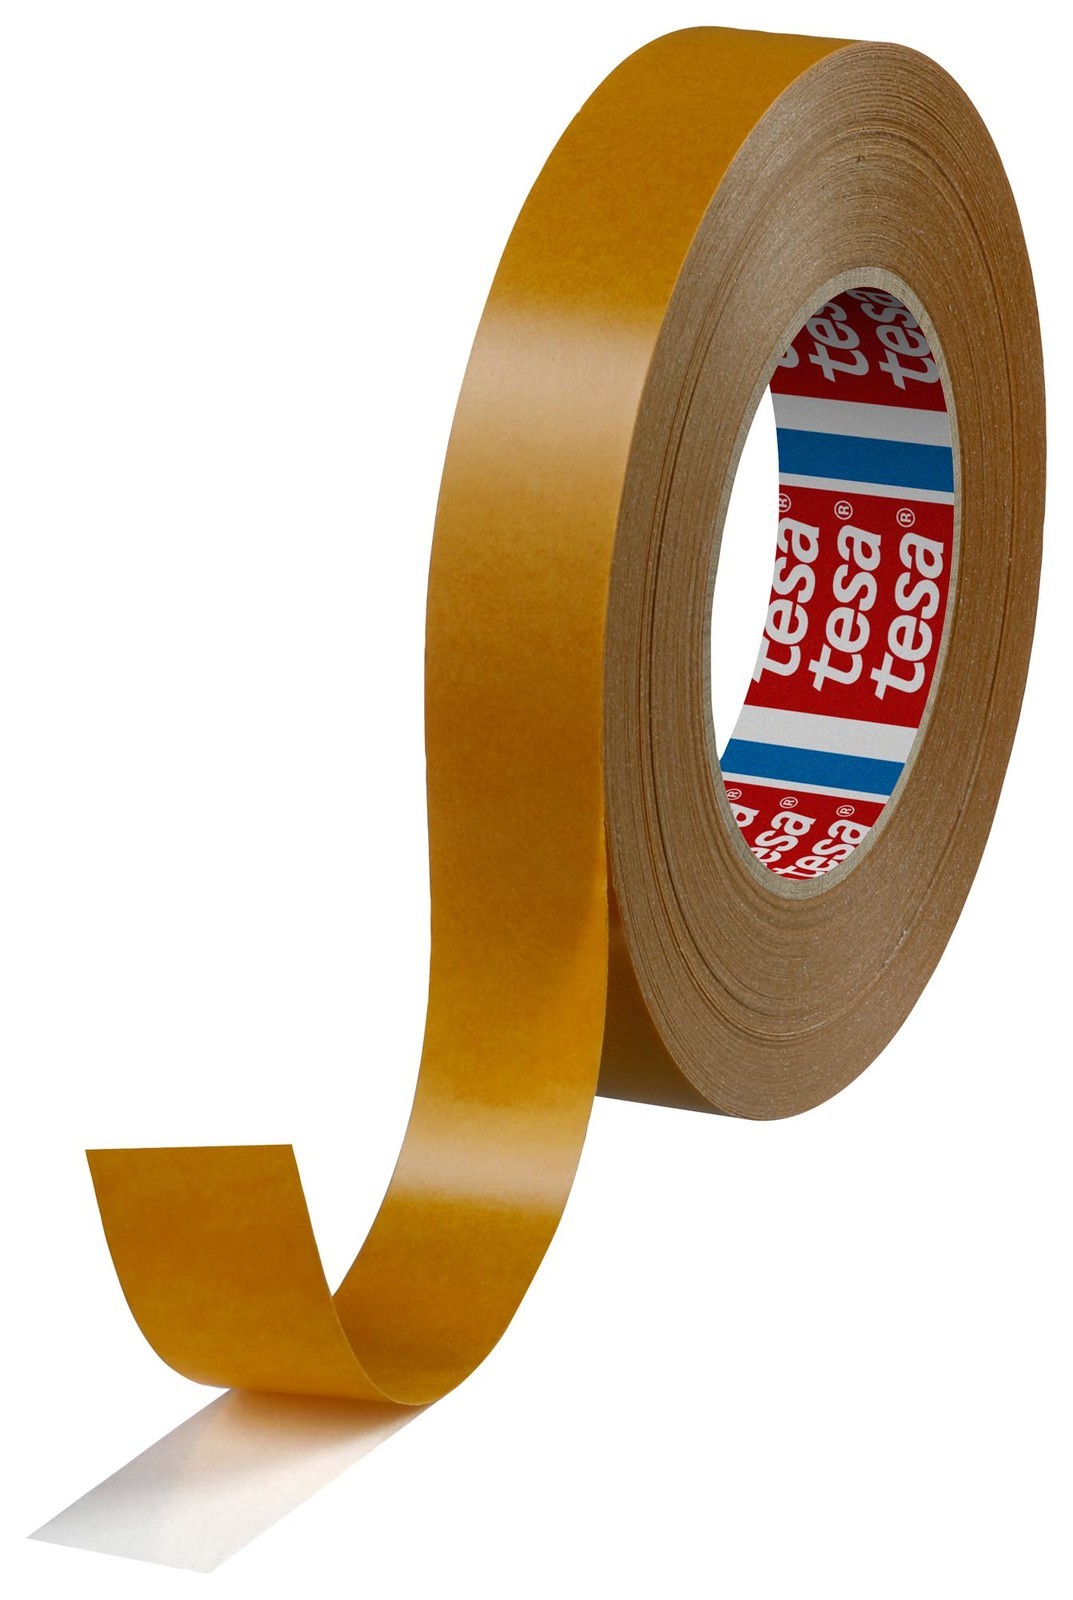 Tesa 51571-00001-00 Double Sided Tape, 50M X 25mm